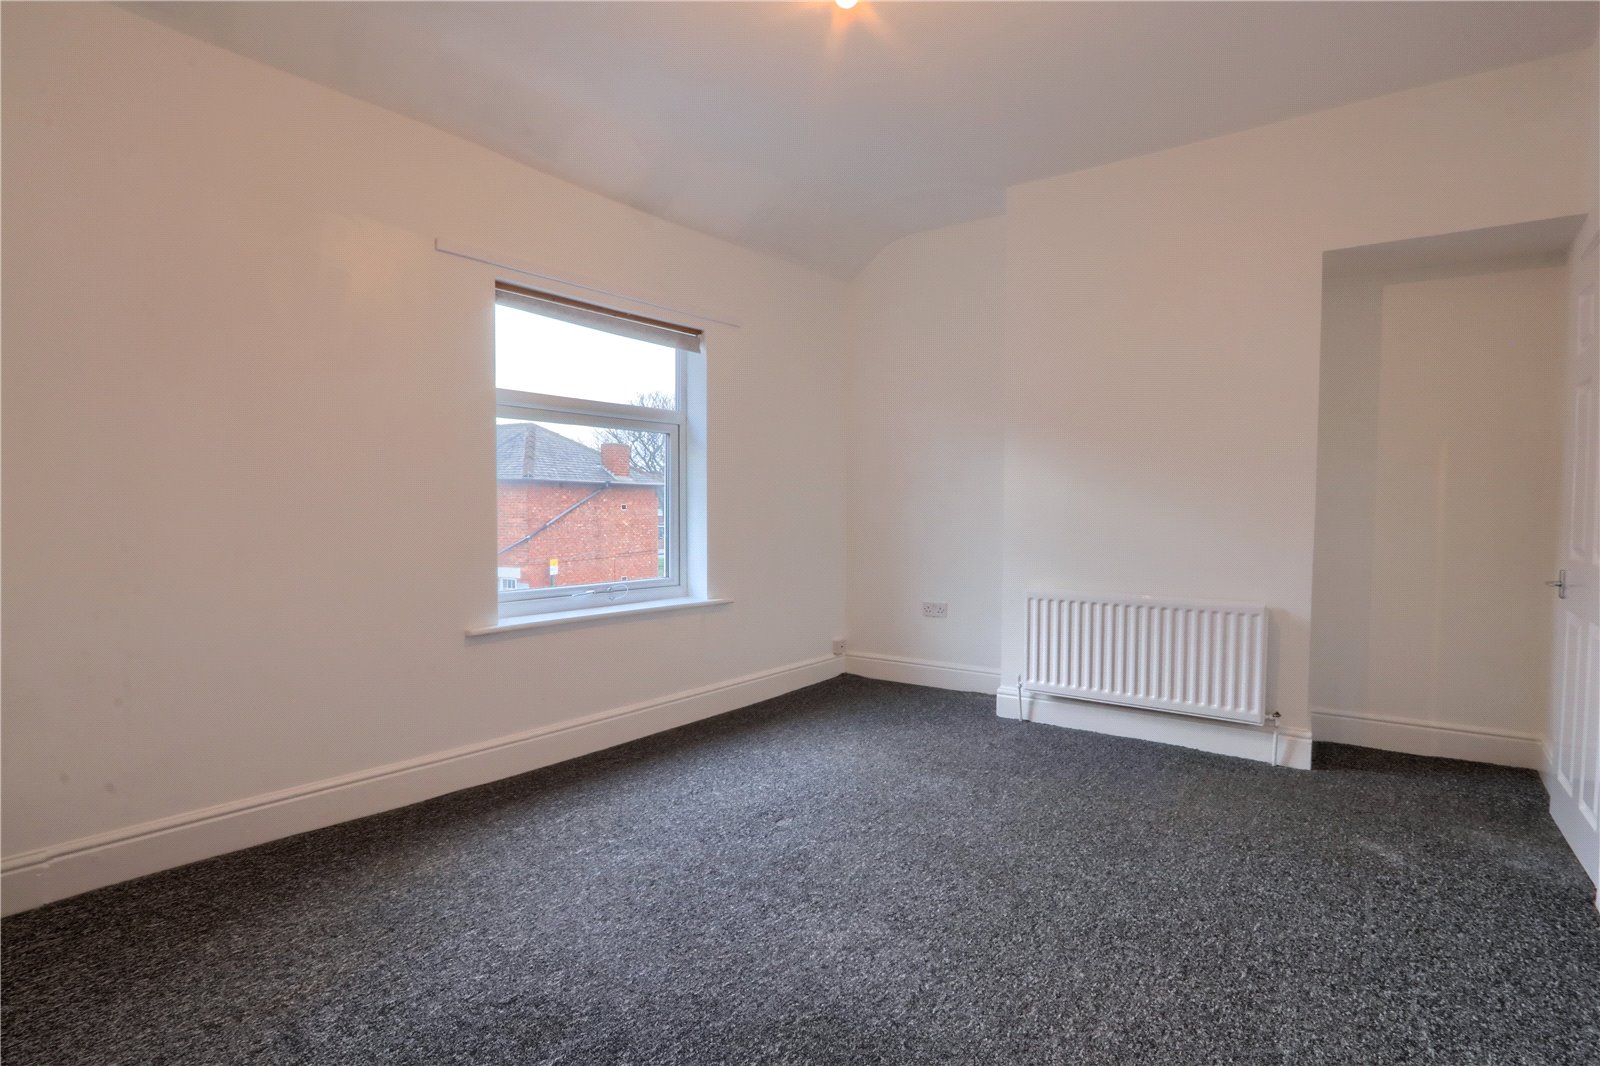 2 bed house for sale in Soppett Street, Redcar  - Property Image 9